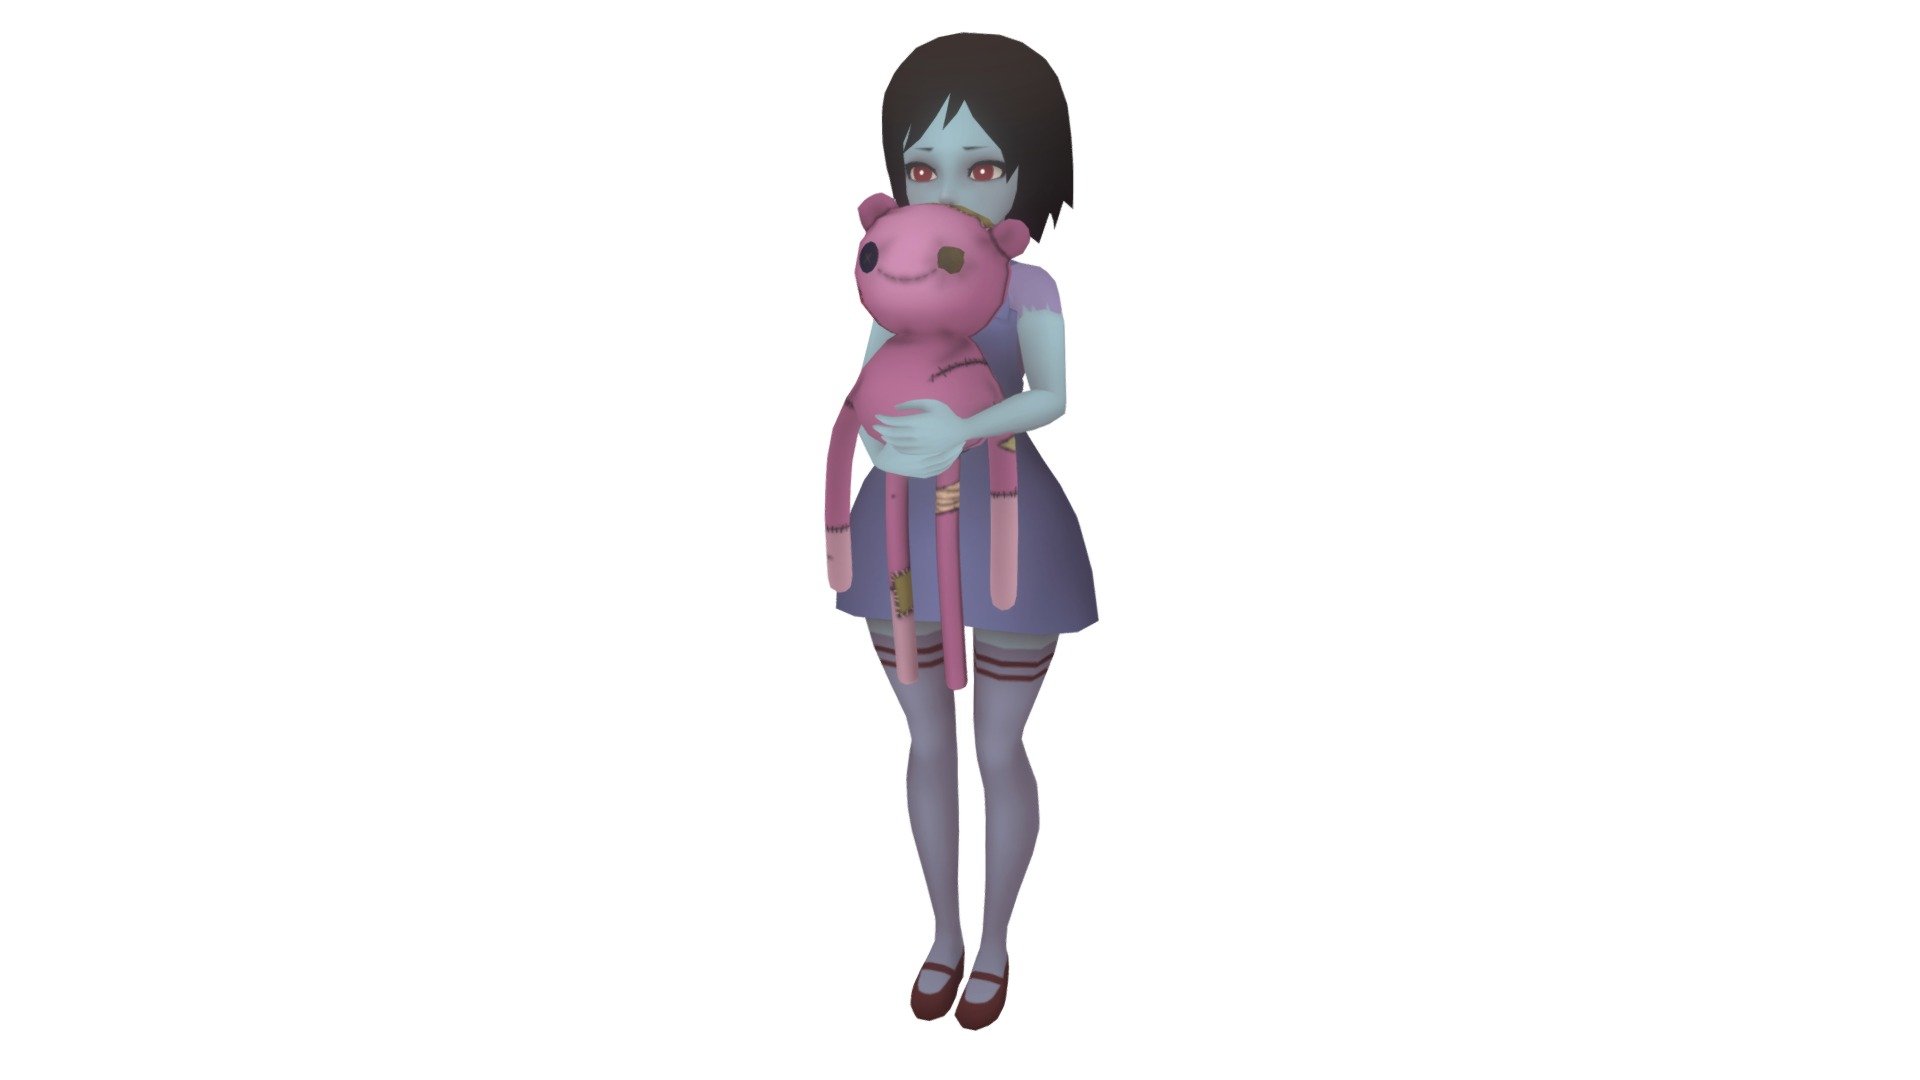 A young Marceline and Hambo model used in the discontinued fan game: https://gamejolt.com/games/what-if-adventure-time-was-a-3d-anime-game/132926

PSD textures are available somewhere on the internet 3d model